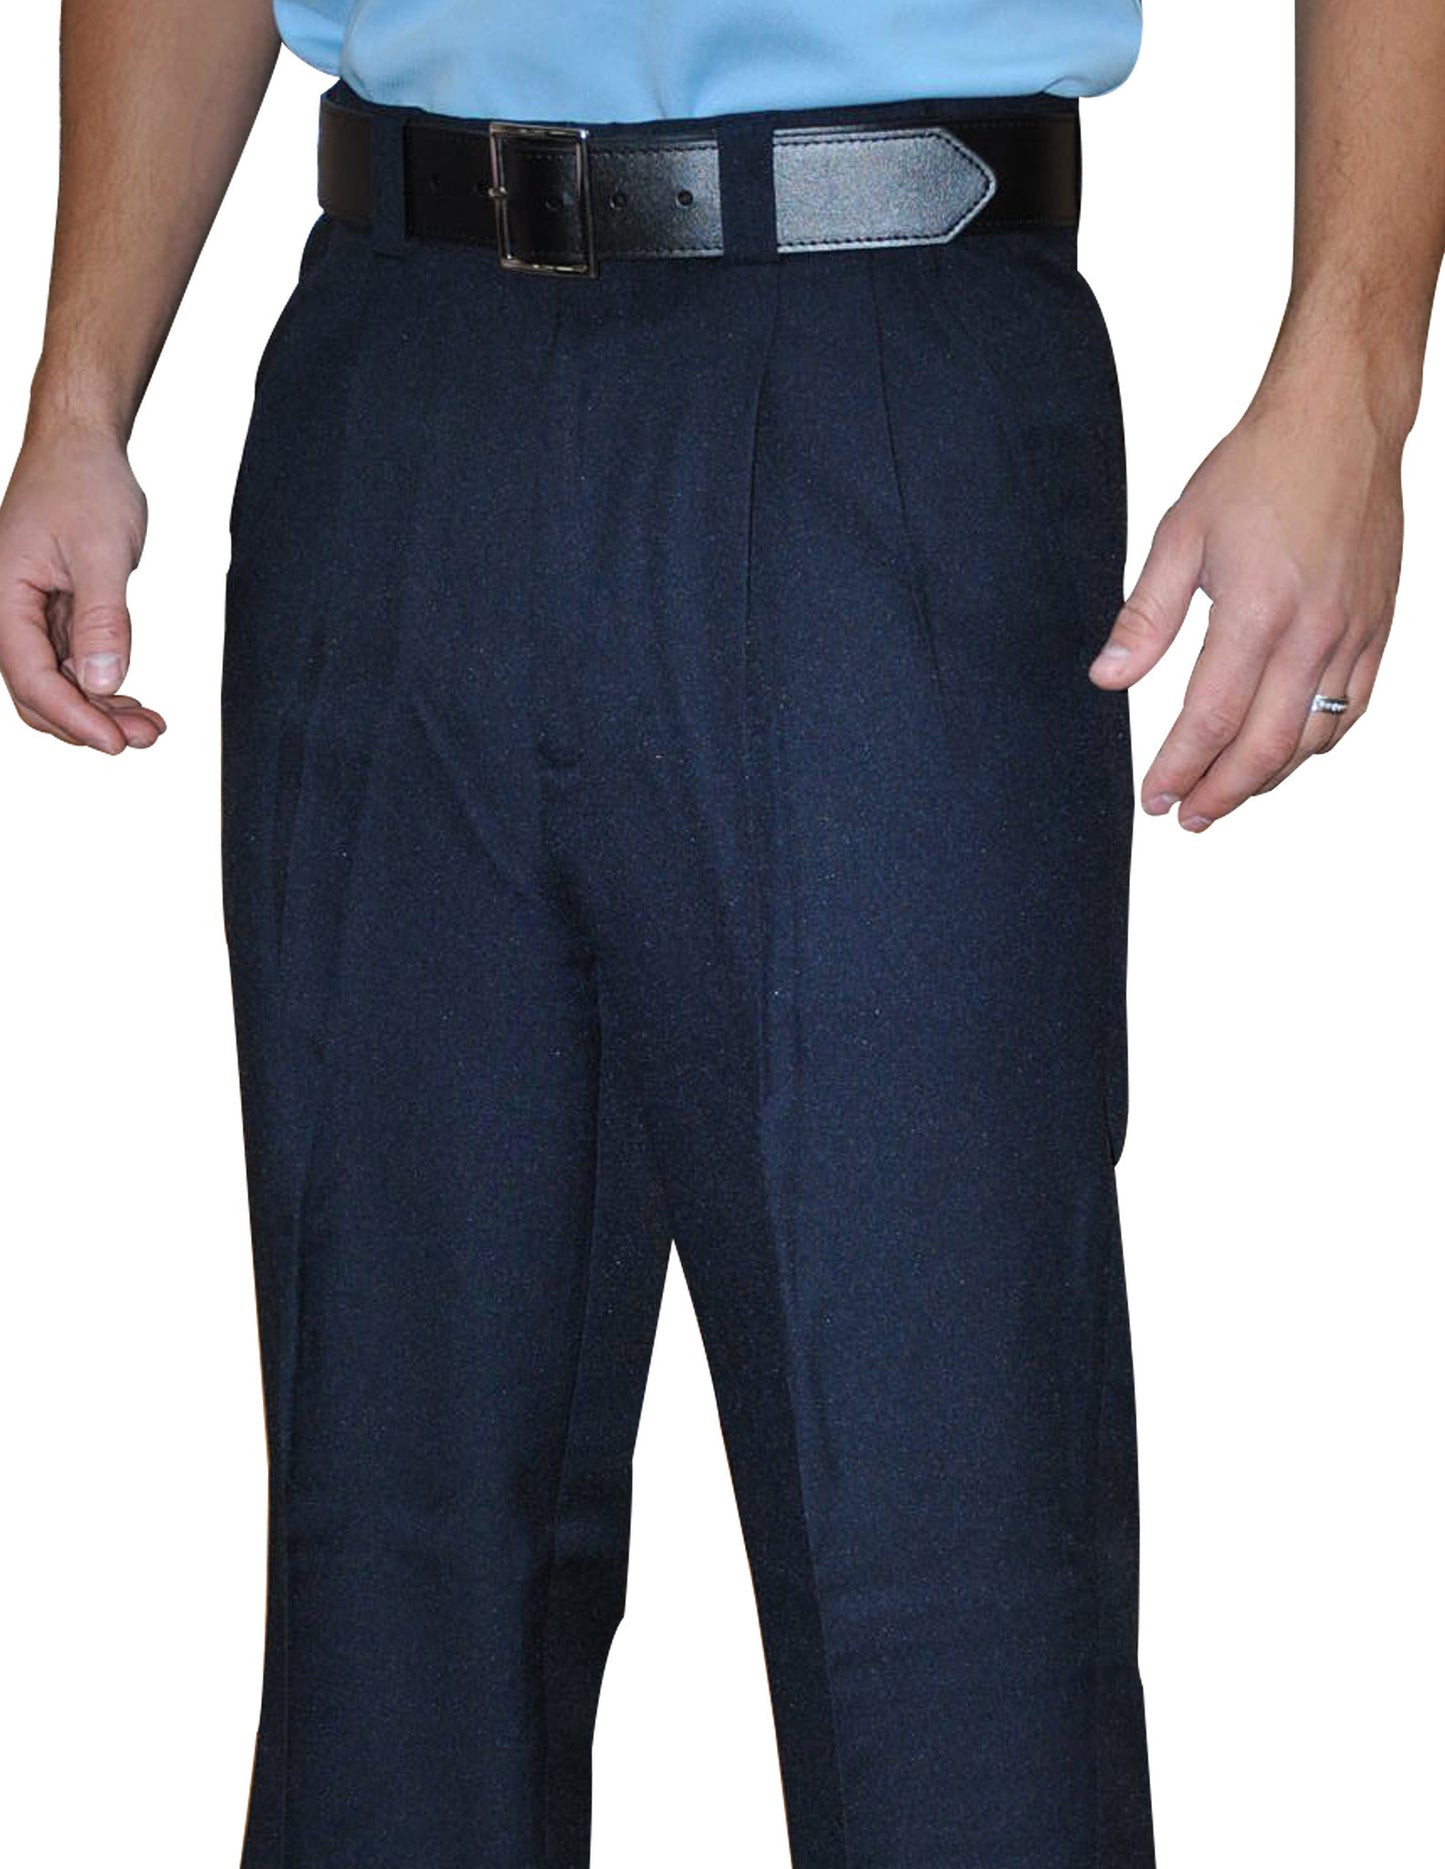 BBS375-Smitty Pleated Combo Pants with Expander Waist Band - Available in Heather, Charcoal Grey and Navy